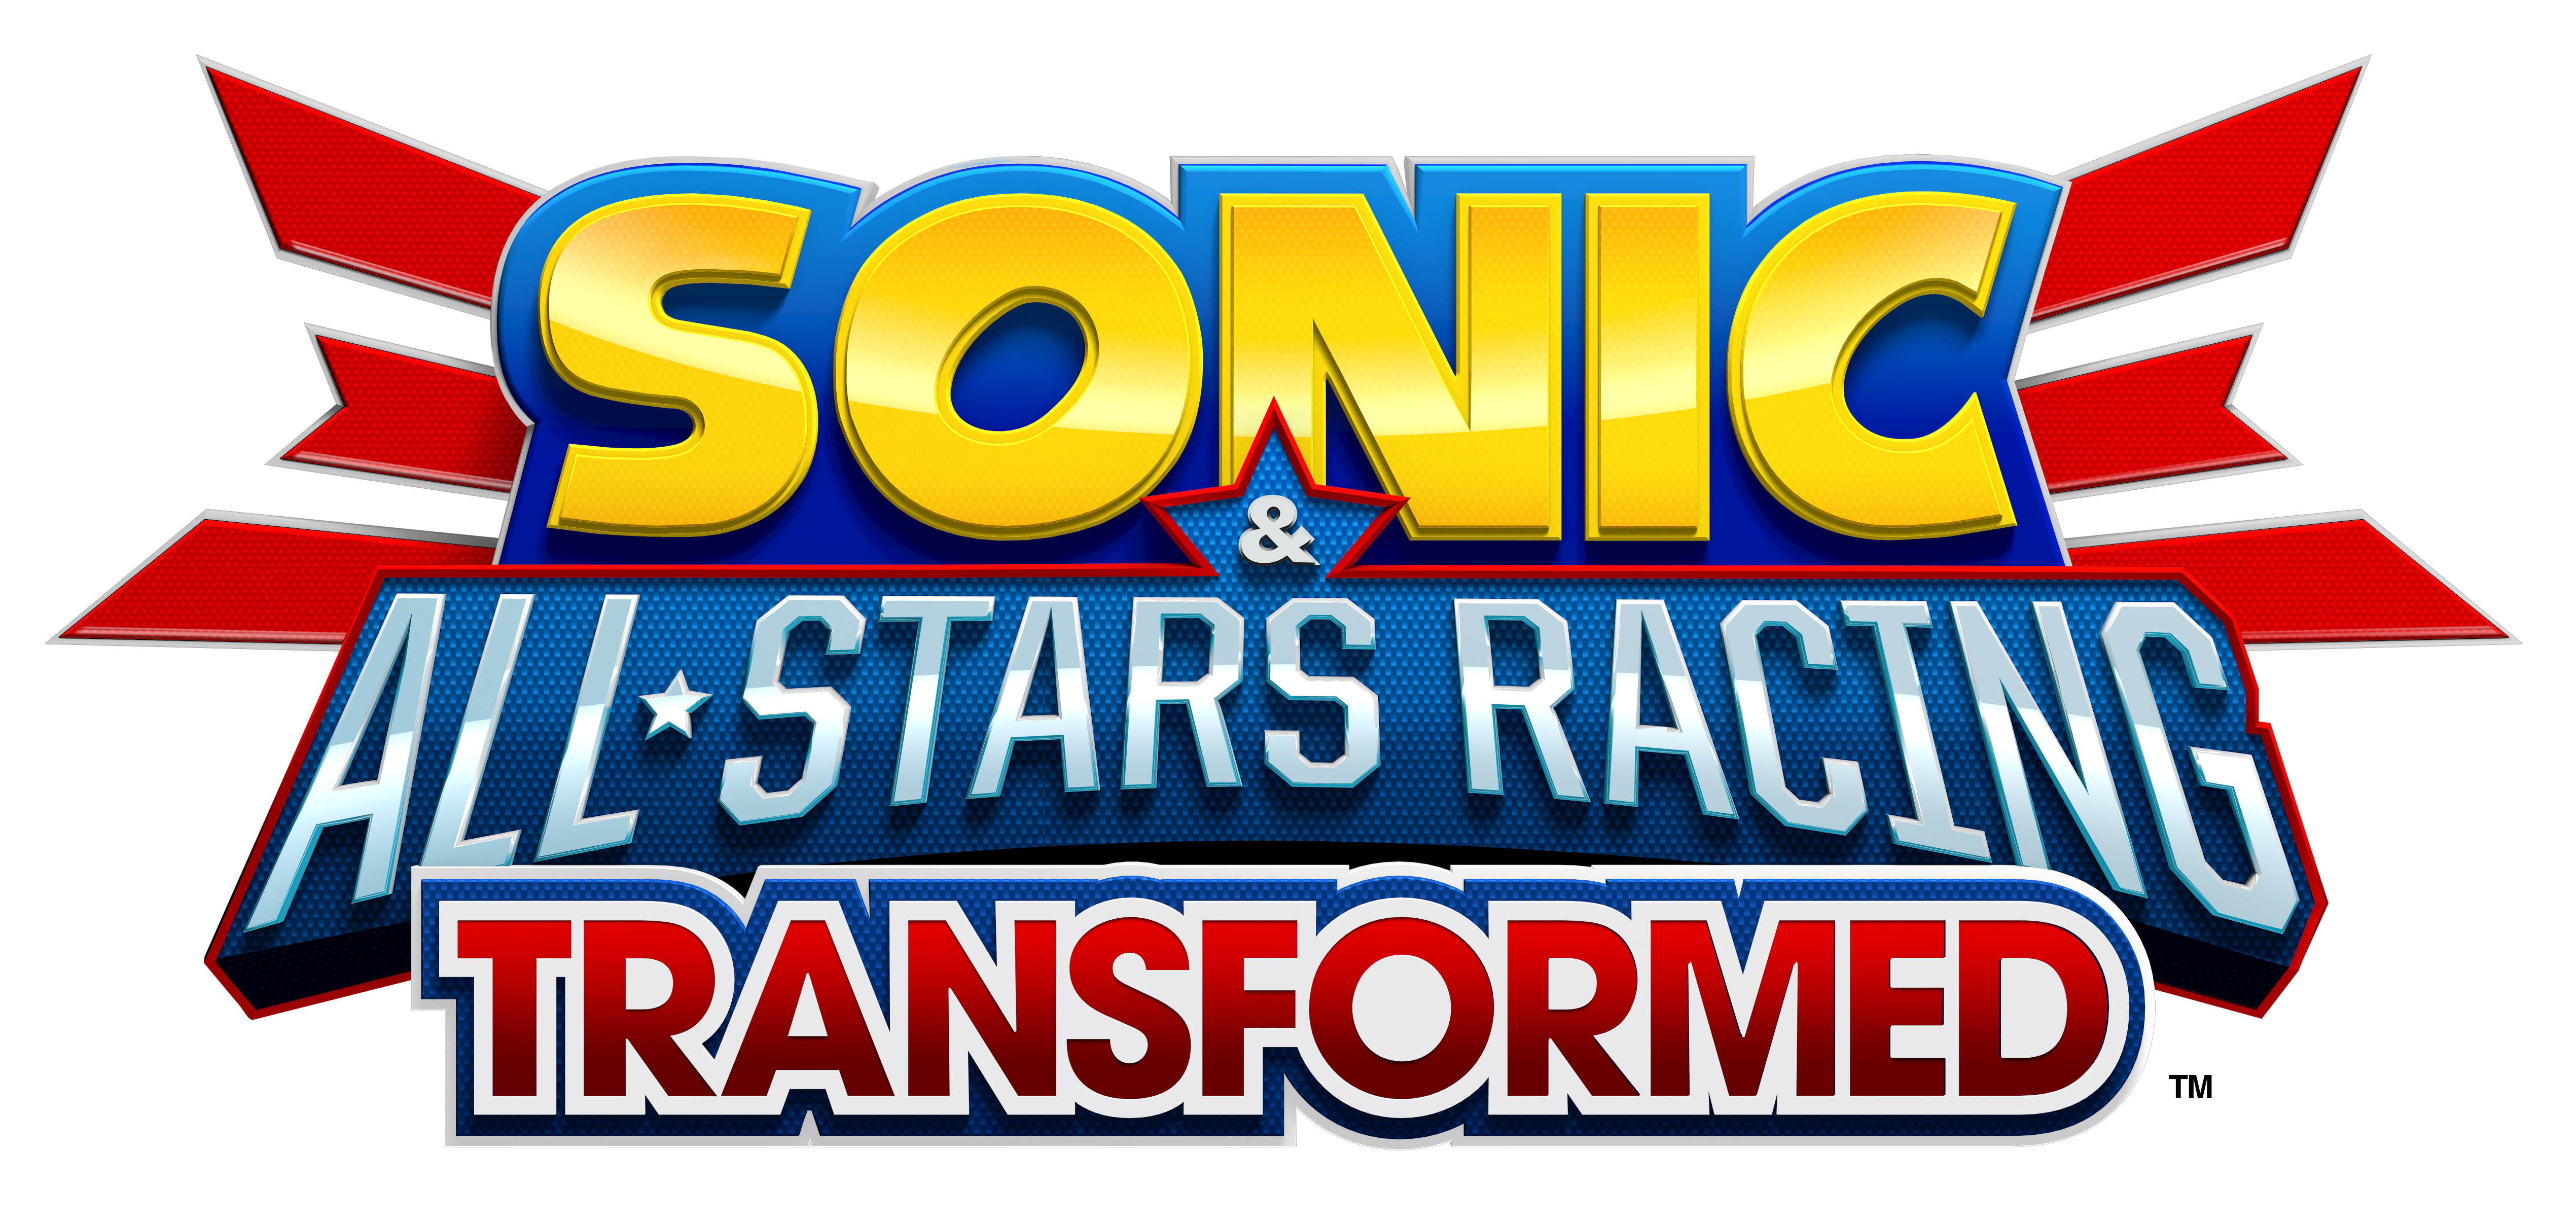 Digital Foundry Says Best Console Version Of Sonic Racing Transformed Is On Wii  U - My Nintendo News